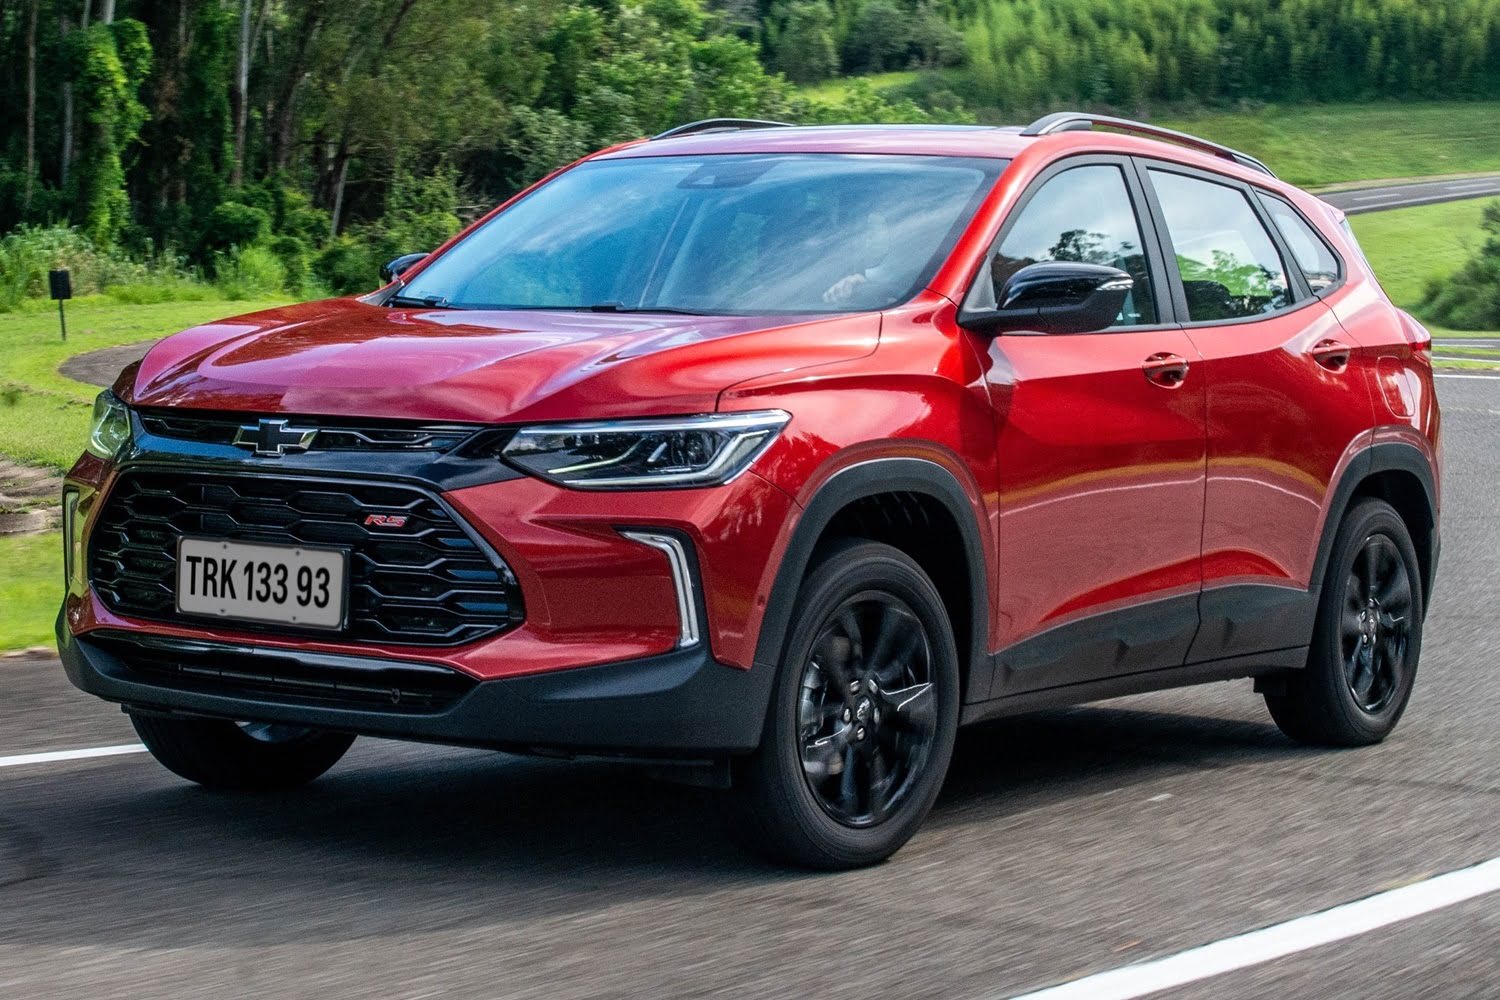 Chevrolet Agile, Starting Price Rs 14 Lakh, Launch Date 2023, Specs,  Images, News, Mileage @ ZigWheels